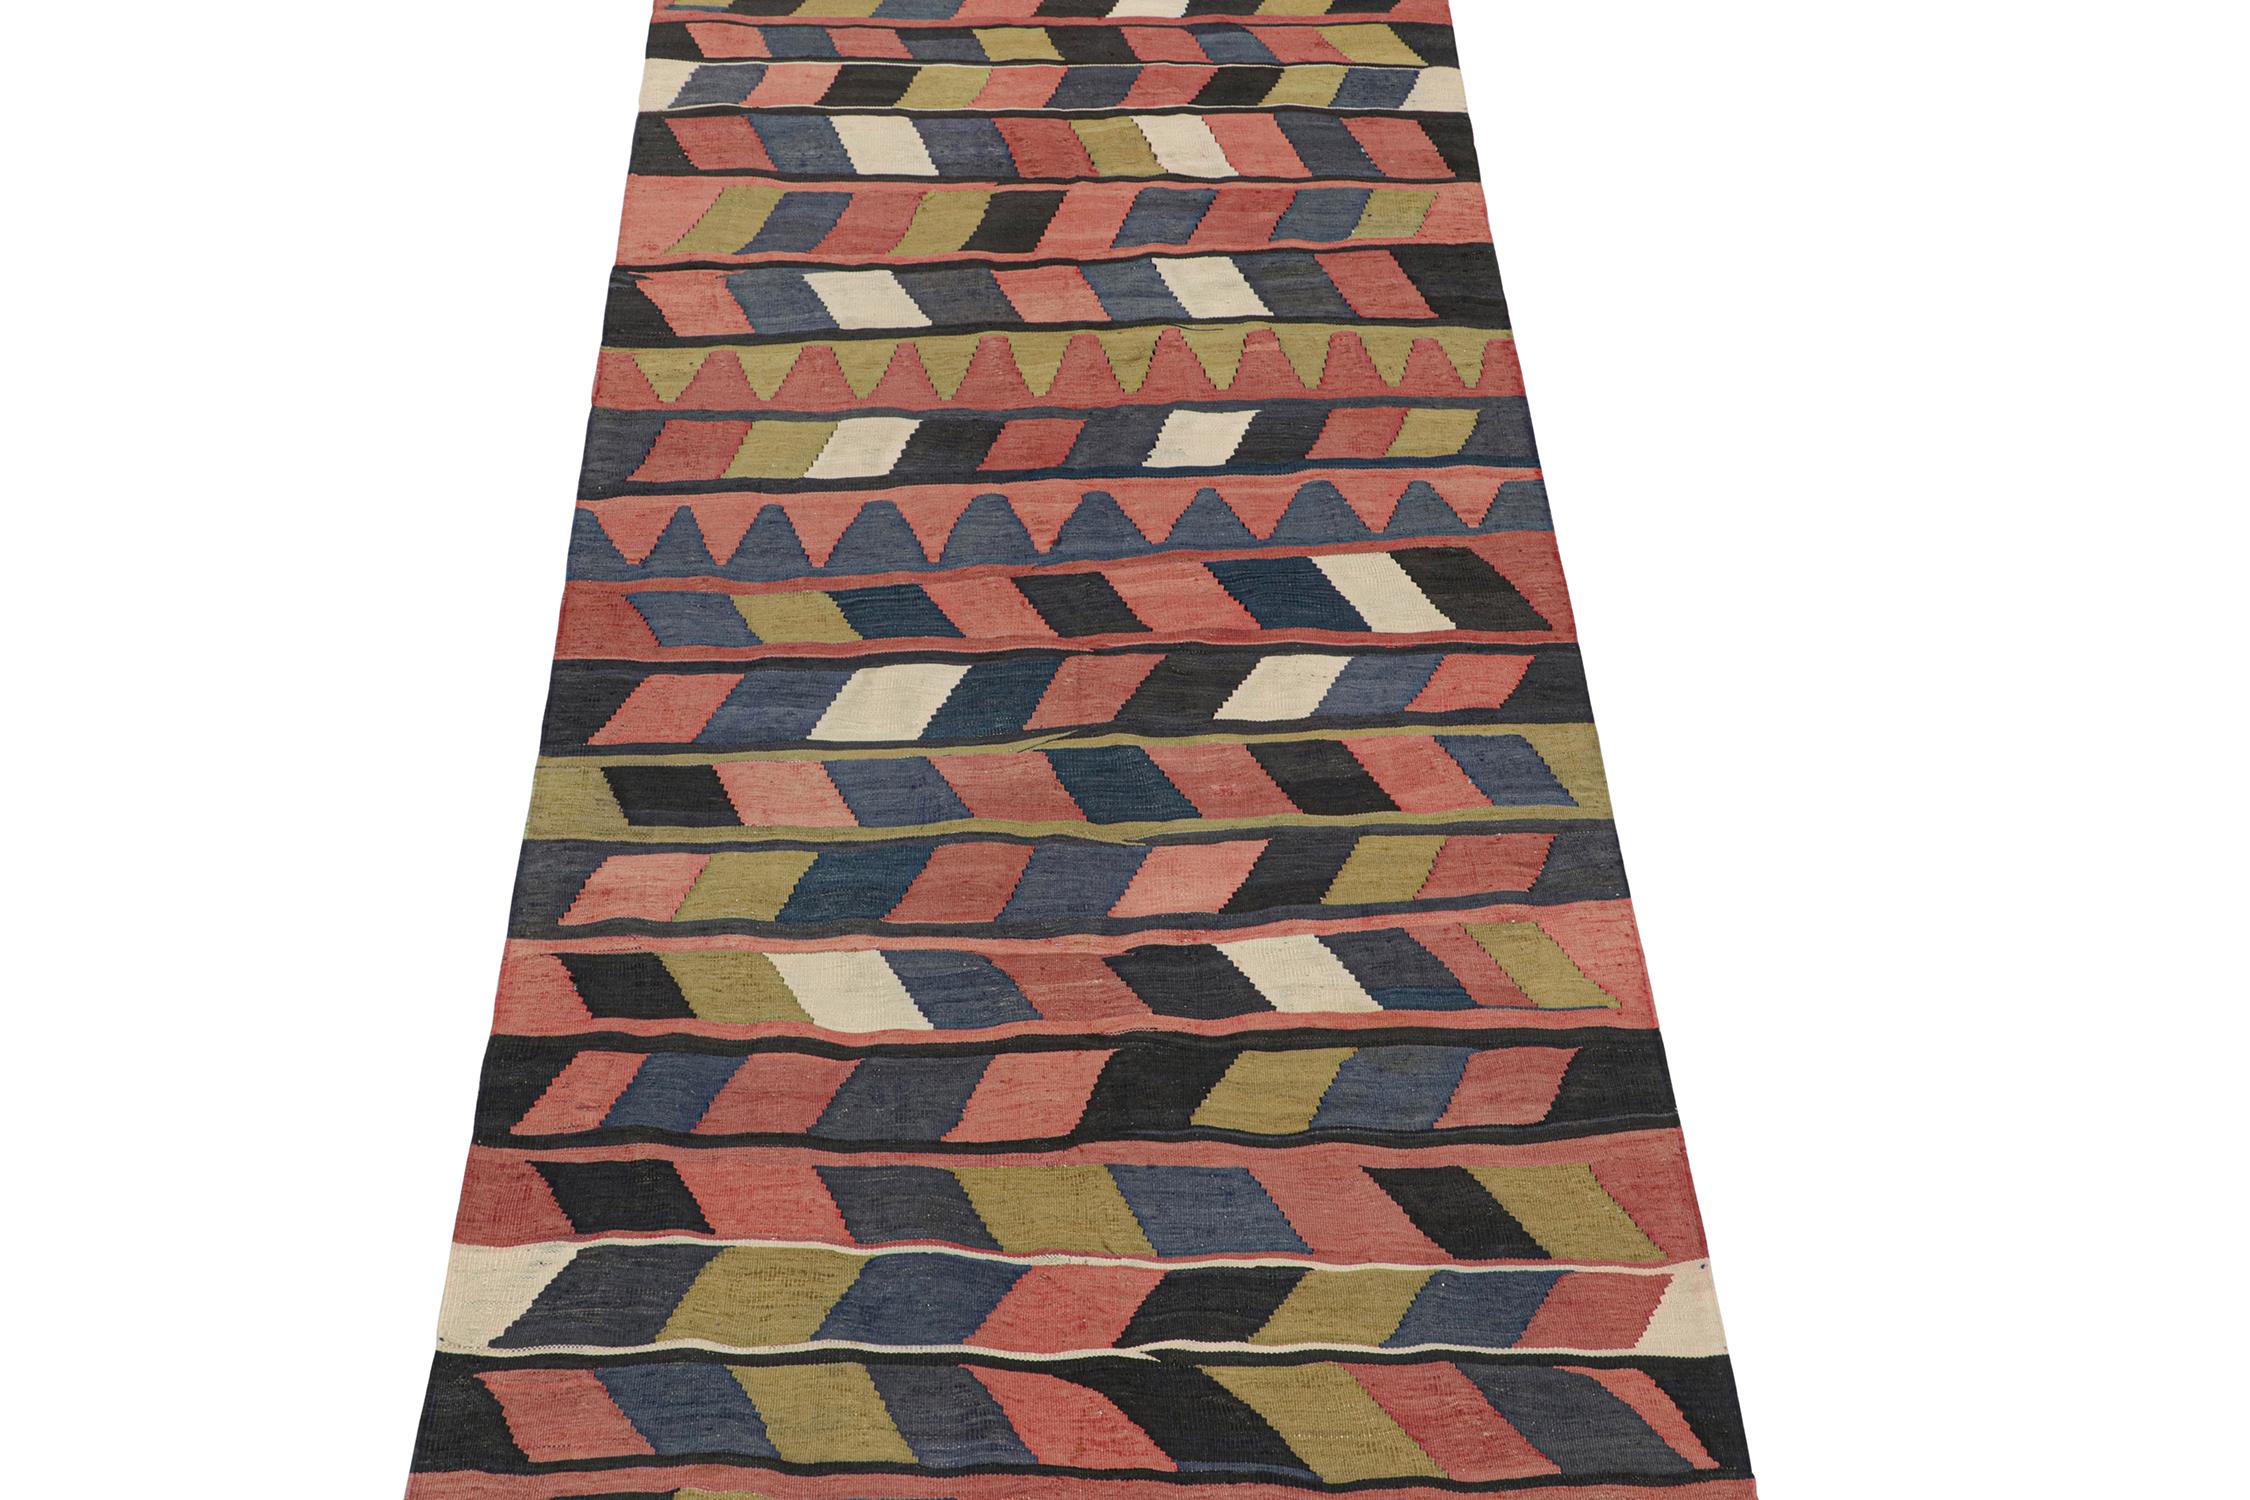 This vintage 5x12 Persian Kilim is believed to be a tribal rug of Karadagh—a mountainous region known for its craft. Handwoven in wool, it originates circa 1950-1960.

Further on the Design:

The bold design prefers geometric patterns in